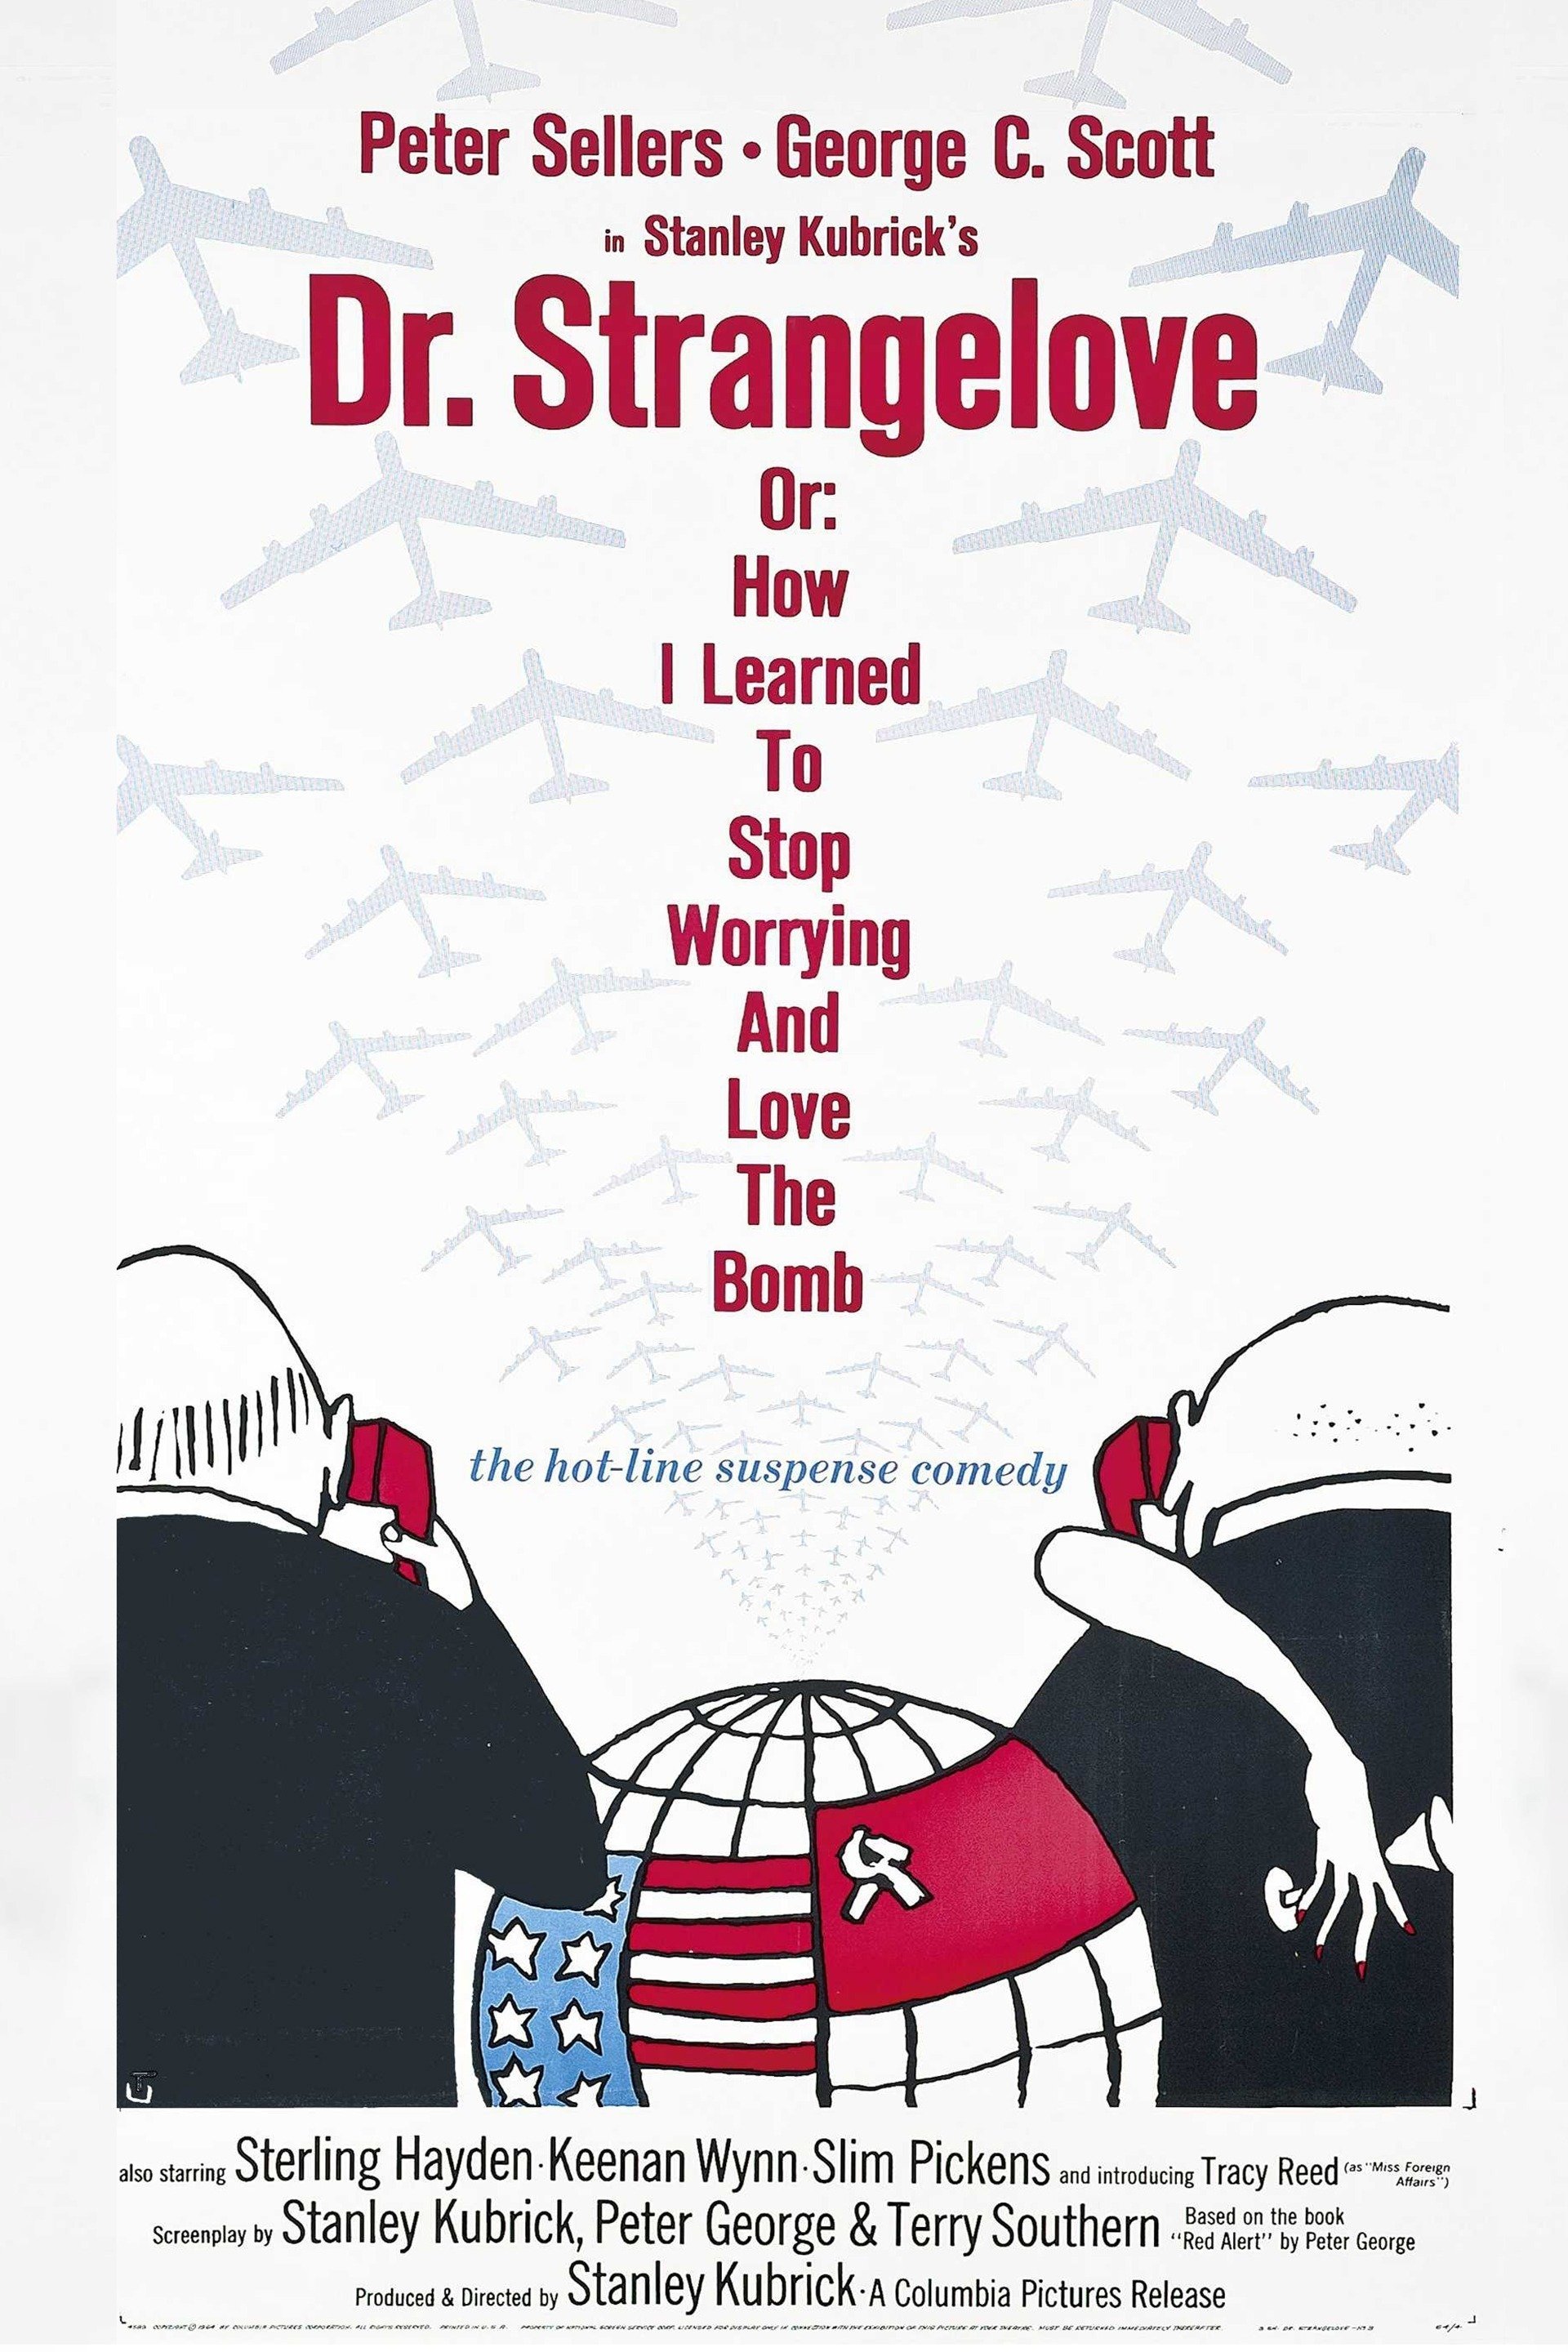 Dr. Strangelove Or: How I Learned to Stop Worrying and Love the Bomb (1964)